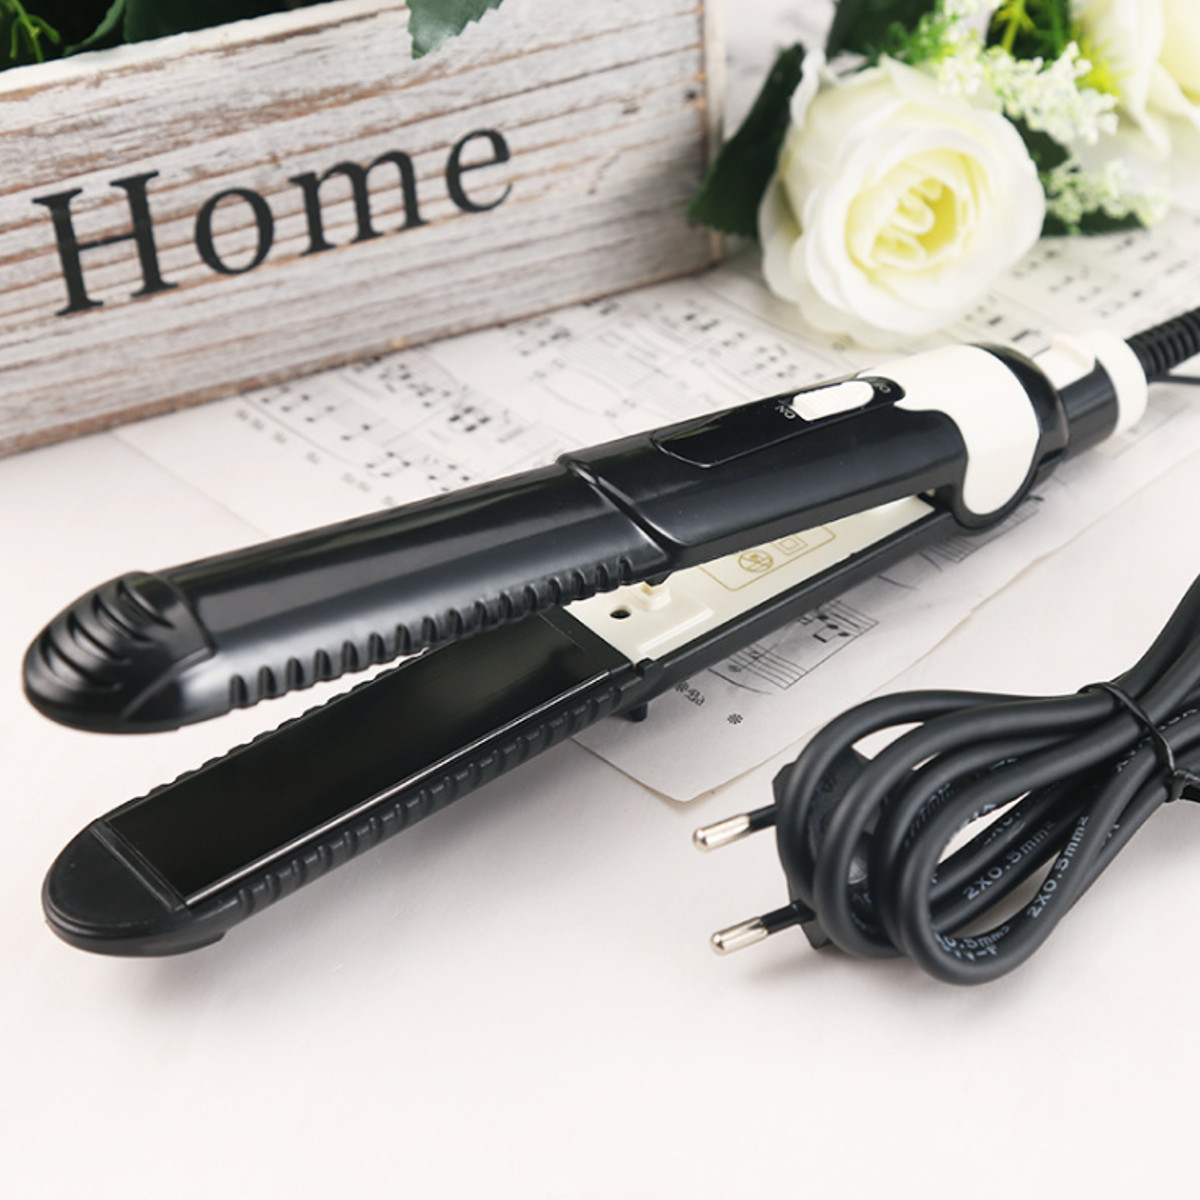 2-In-1-Portable-Curler-Straightener-Tourmaline-Ionic-Flat-Iron-Heat-Up-Fast-220V-Hair-Curler-1606091-8